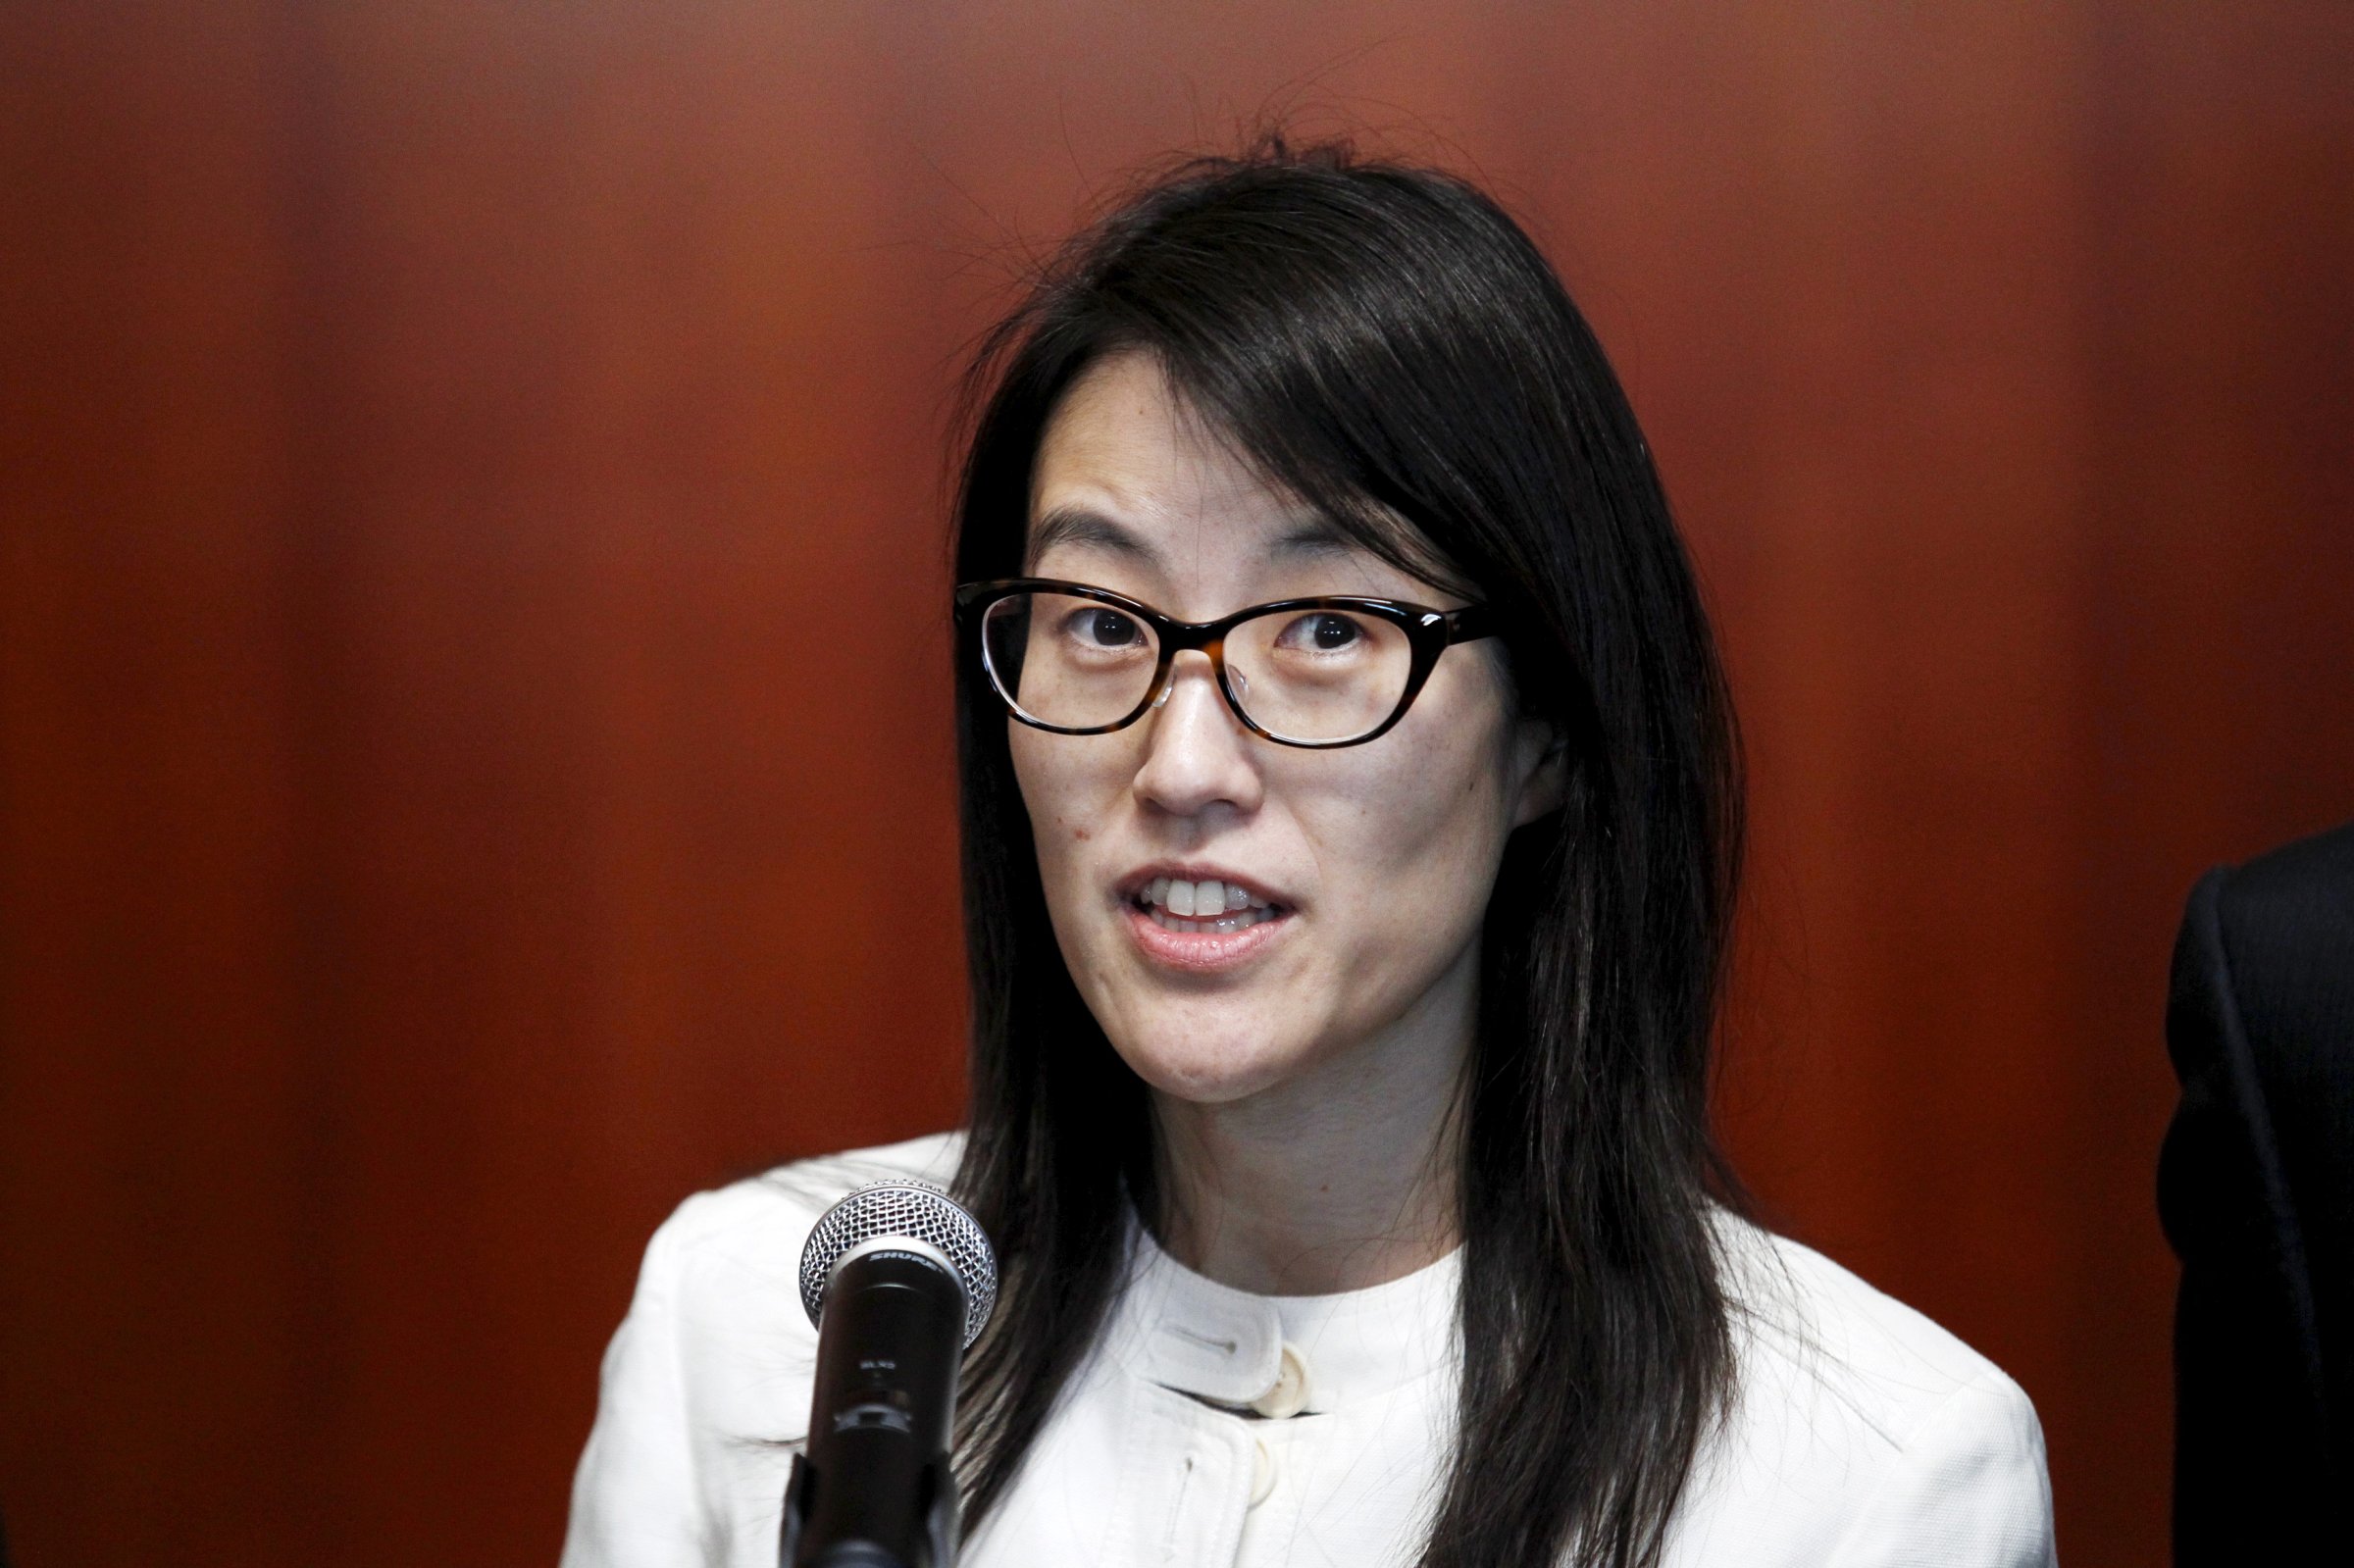 Ellen Pao speaks to the media after losing her high profile gender discrimination lawsuit against venture capital firm Kleiner, Perkins, Caufield and Byers in San Francisco, California in this March 27, 2015, file photo. Pao faces an uphill battle should she choose to appeal her defeat last week in a gender discrimination lawsuit against former employer Kleiner, Perkins, Caufield & Byers, the Silicon Valley venture capital firm. REUTERS/Beck Diefenbach/Files